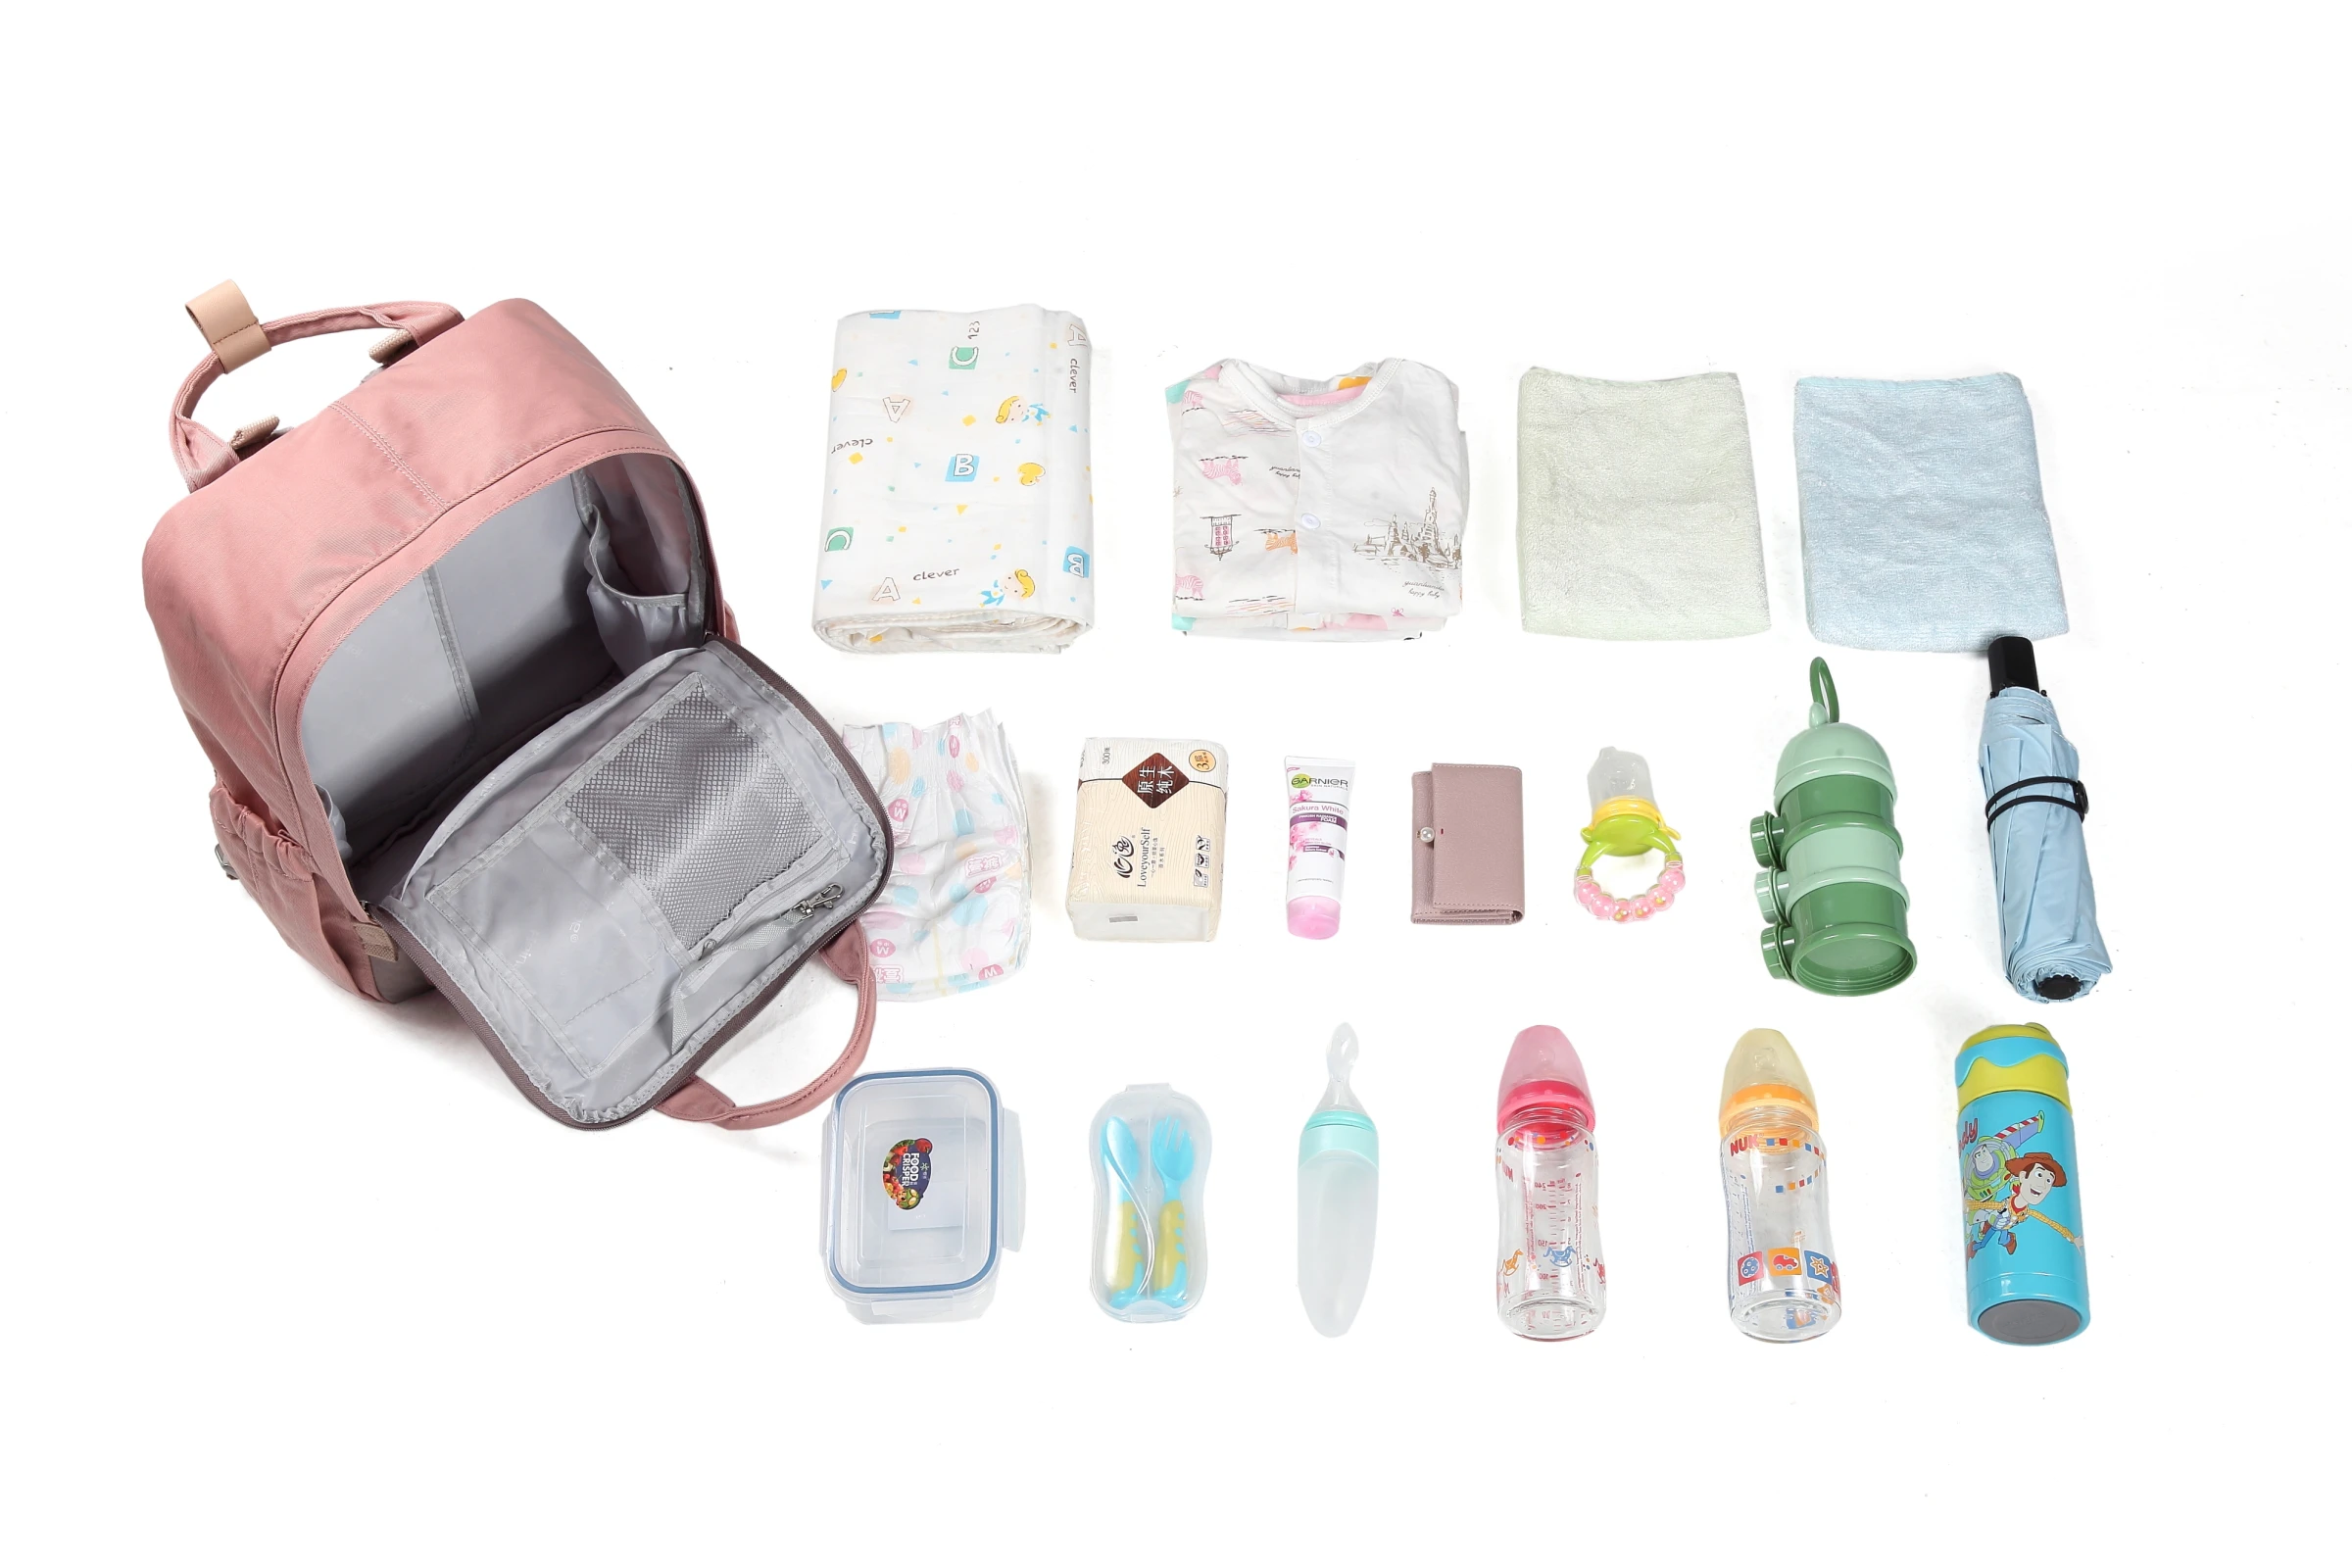 
2020 most fashion water resistant manufacture diaper backpack 